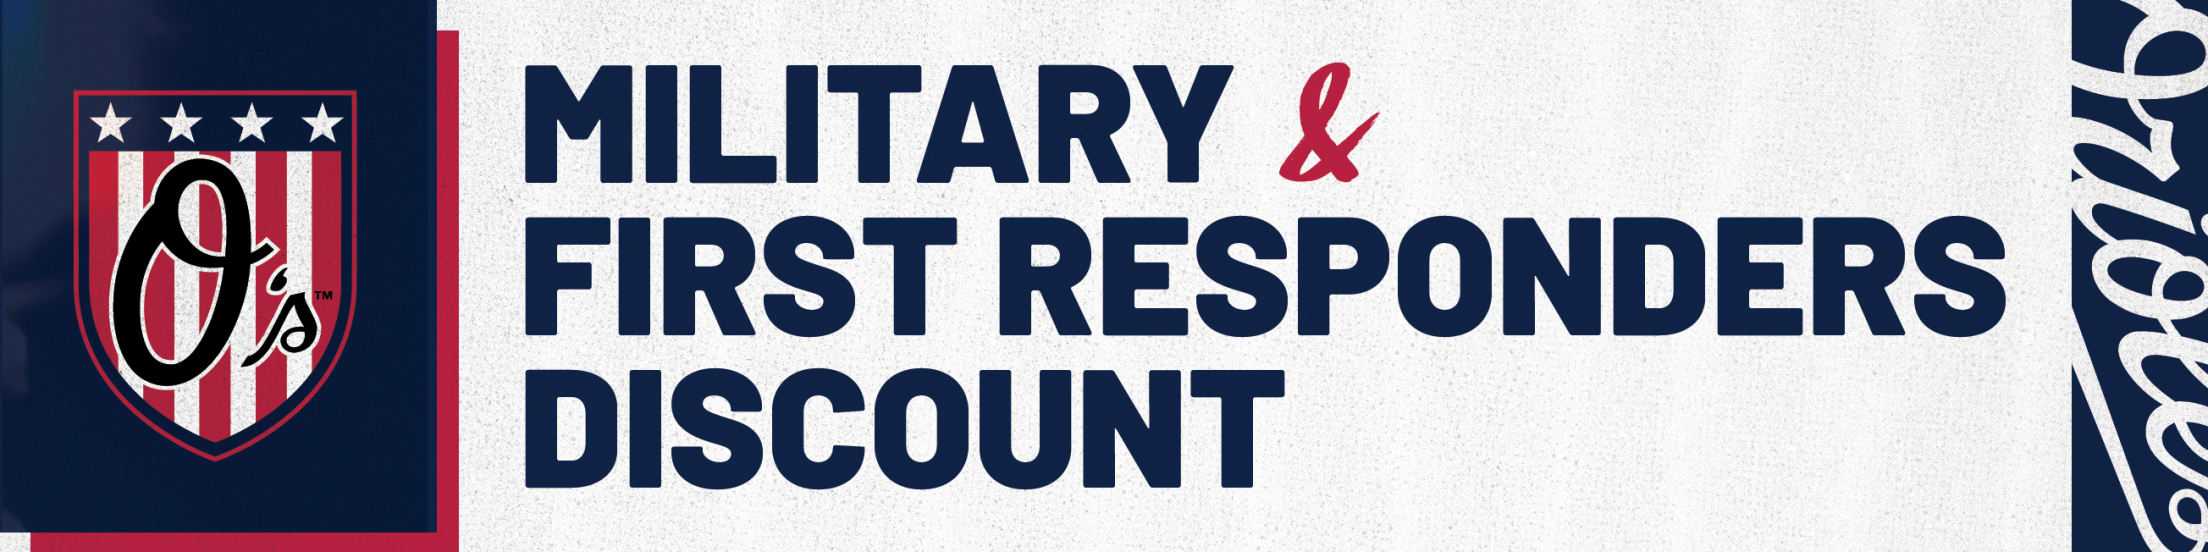 Military & First Responder Ticket Discount Baltimore Orioles